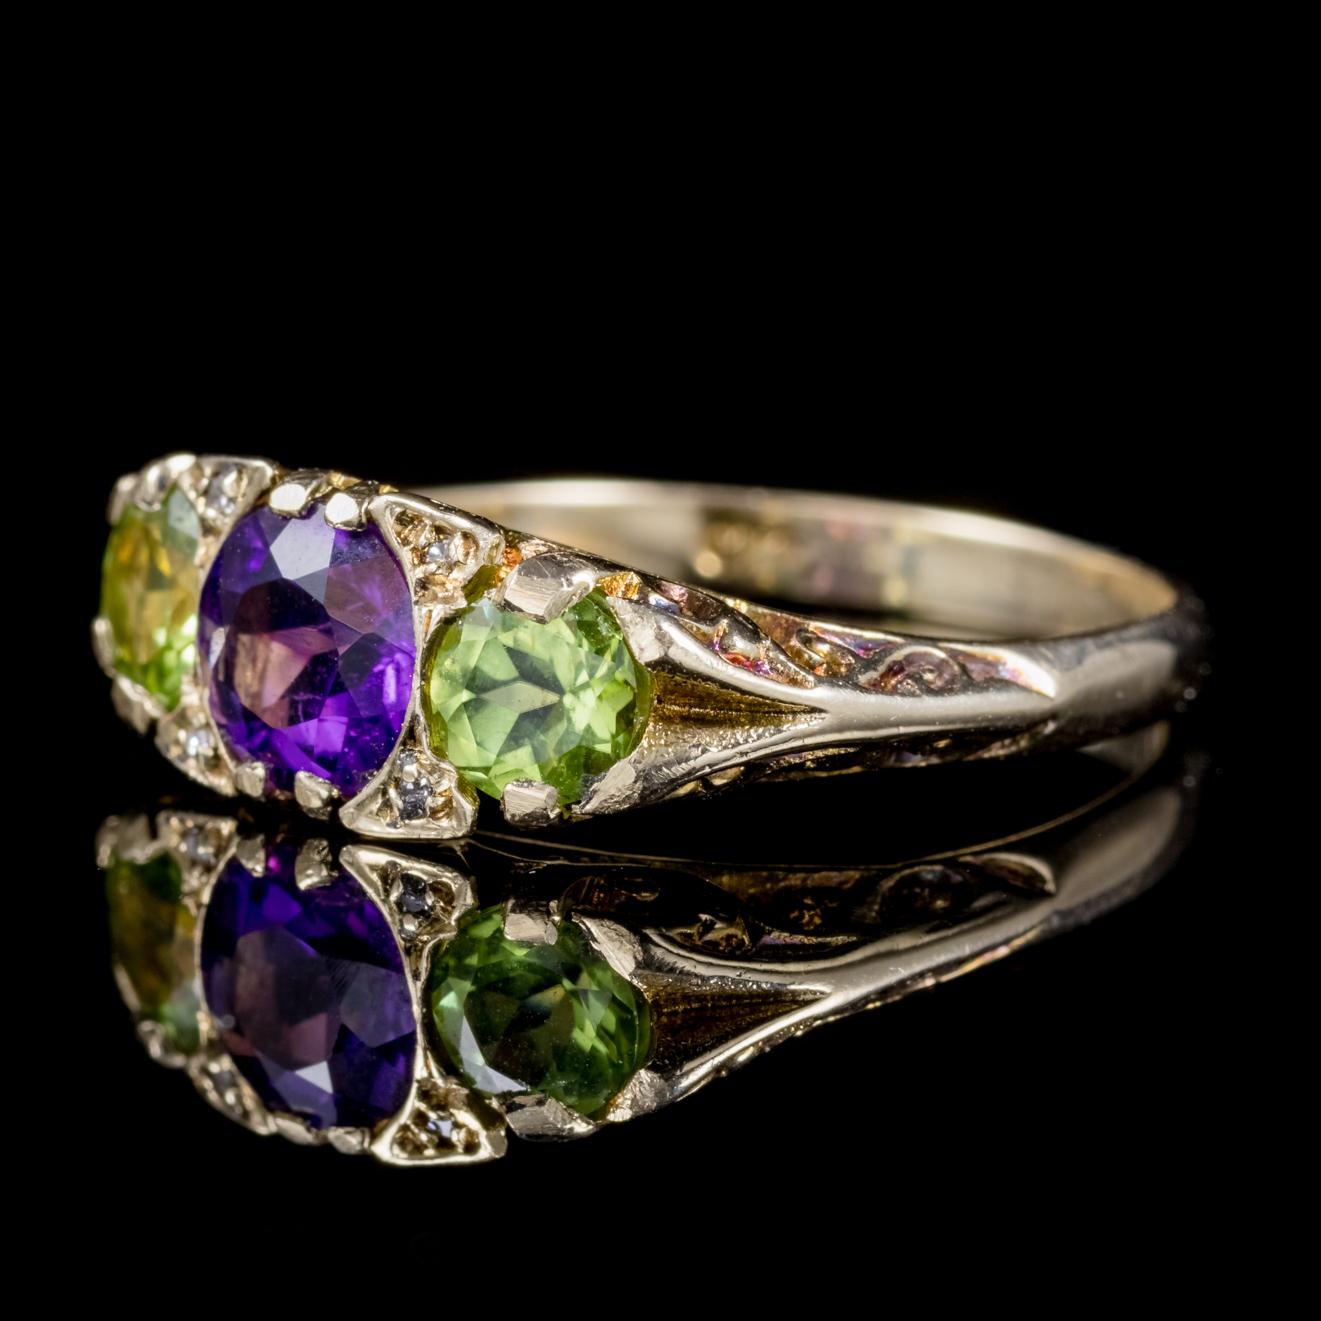 A lovely antique Victorian Suffragette ring adorned with a 0.75ct violet Amethyst, two 0.25ct green Peridots and four small Diamonds.

Suffragettes liked to be depicted as feminine, their jewellery popularly consisted of Violet, Green and White